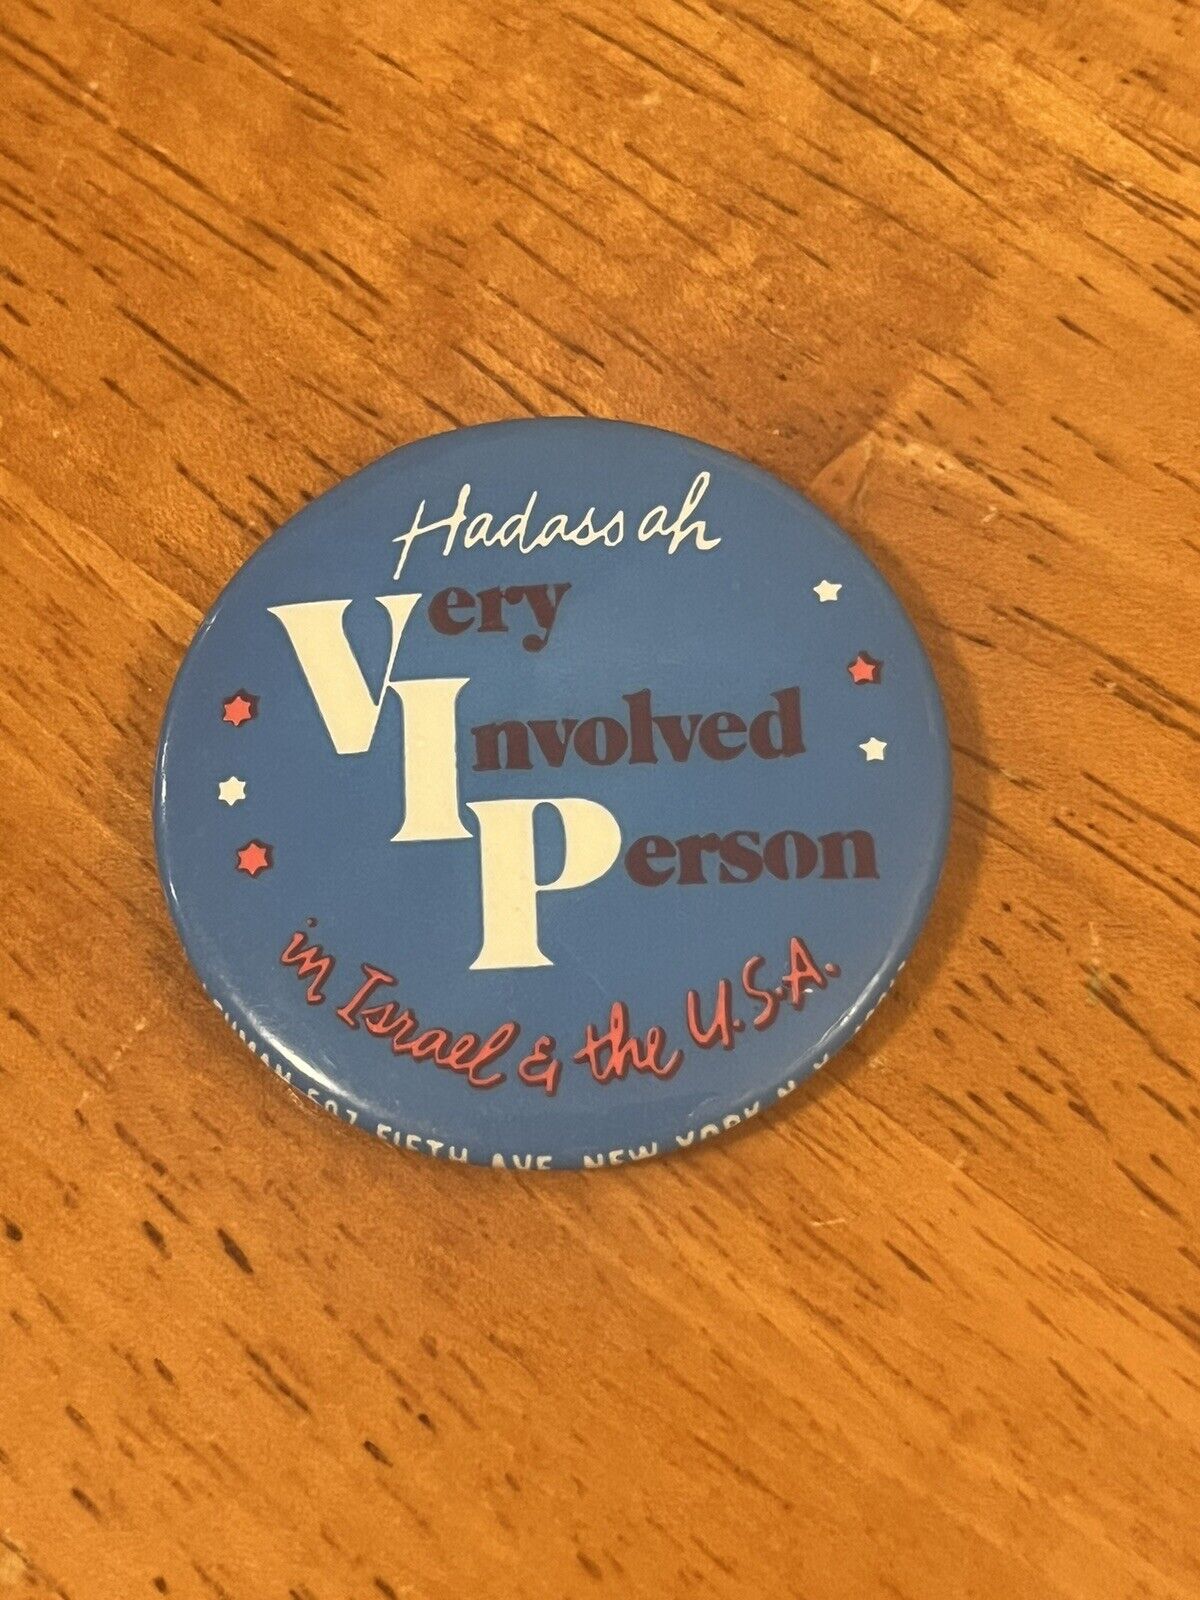 Hadassah V.I.P. Very Involved Person in Israel & the USA vintage Pinback Button